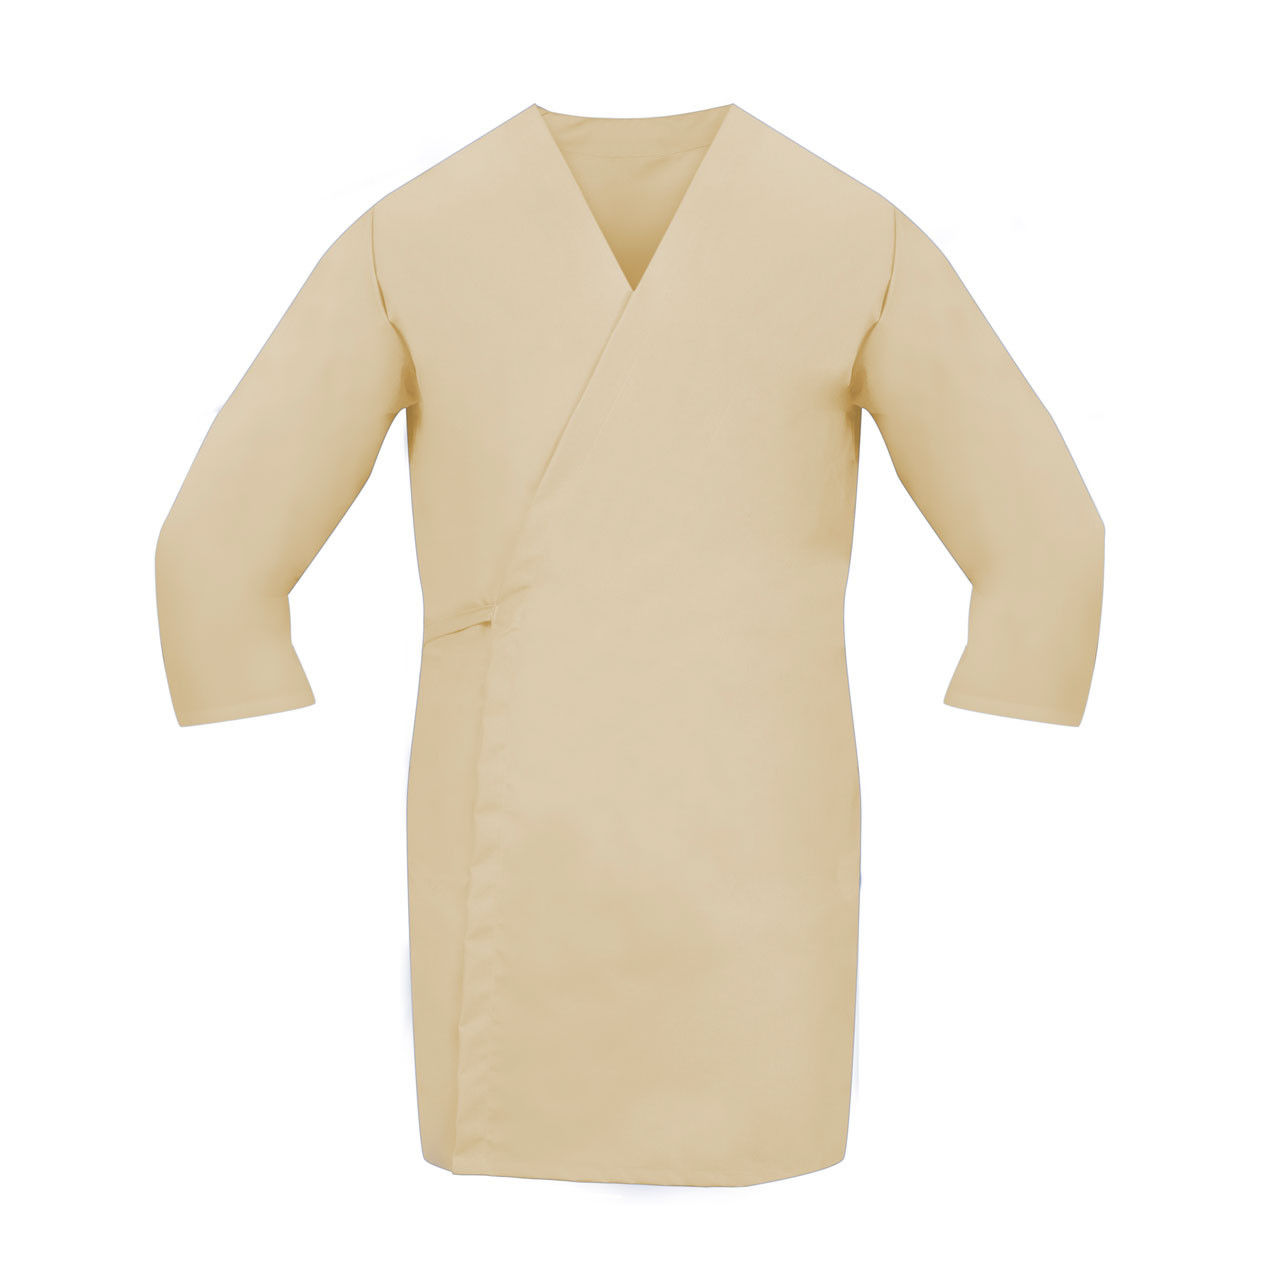 What sizes are available for the Tan Smock Wraps?